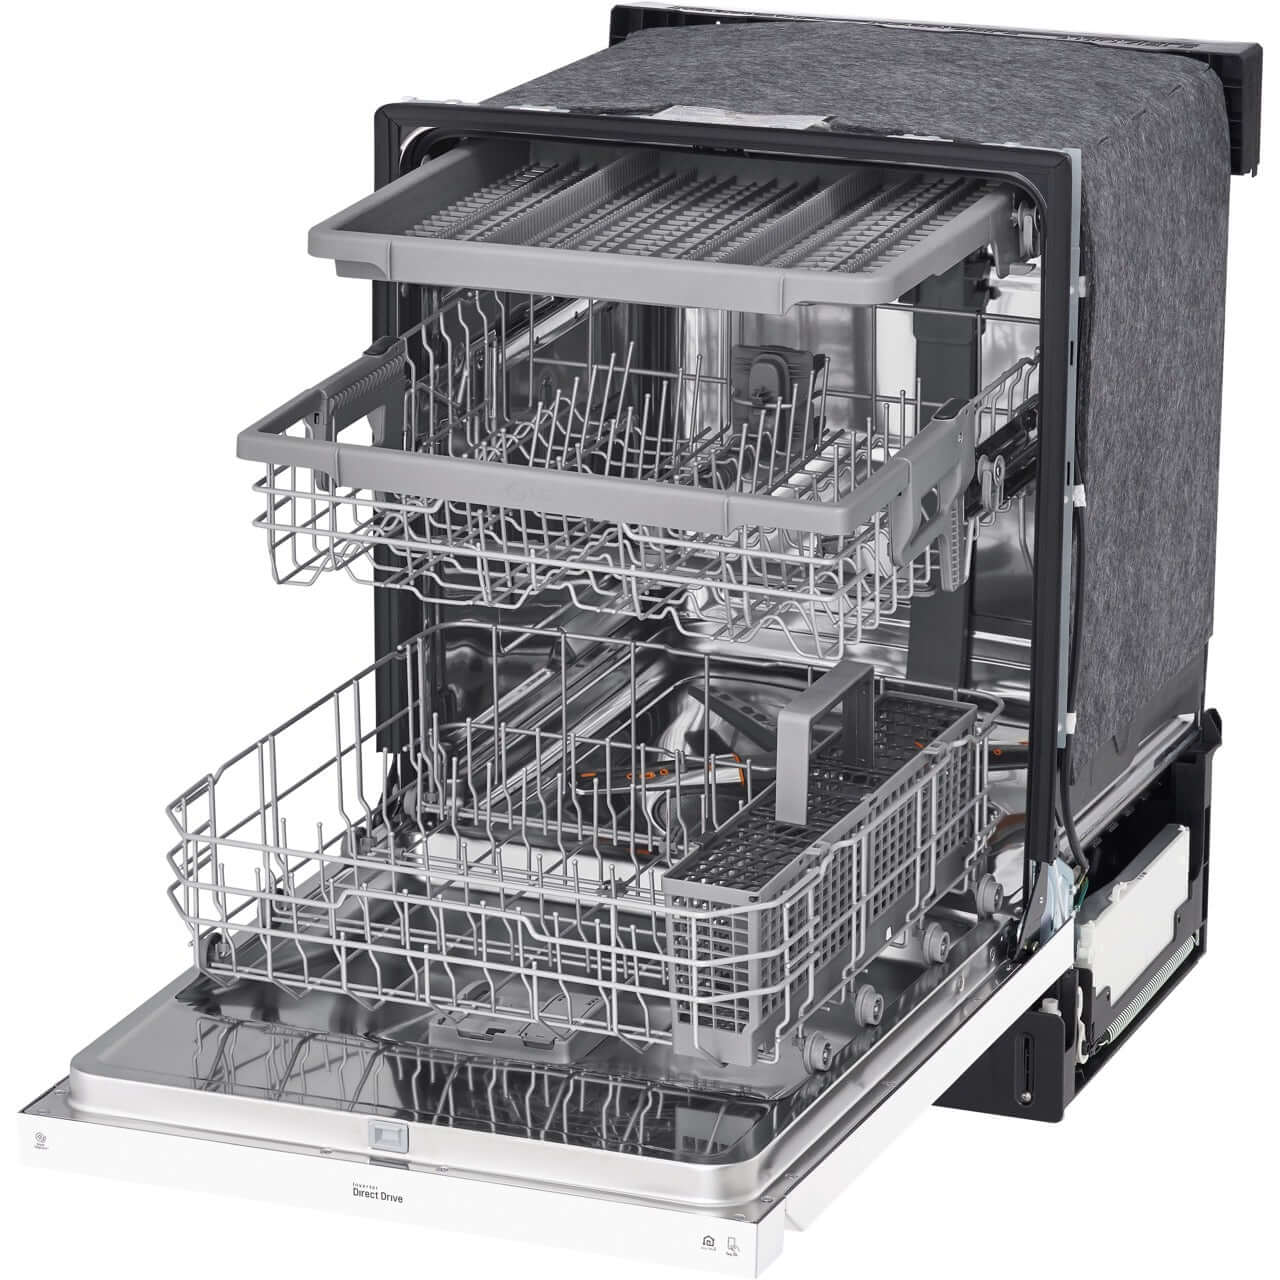 LG 24-Inch Front Control Dishwasher with QuadWash and 3rd Rack in White (LDFN4542W)